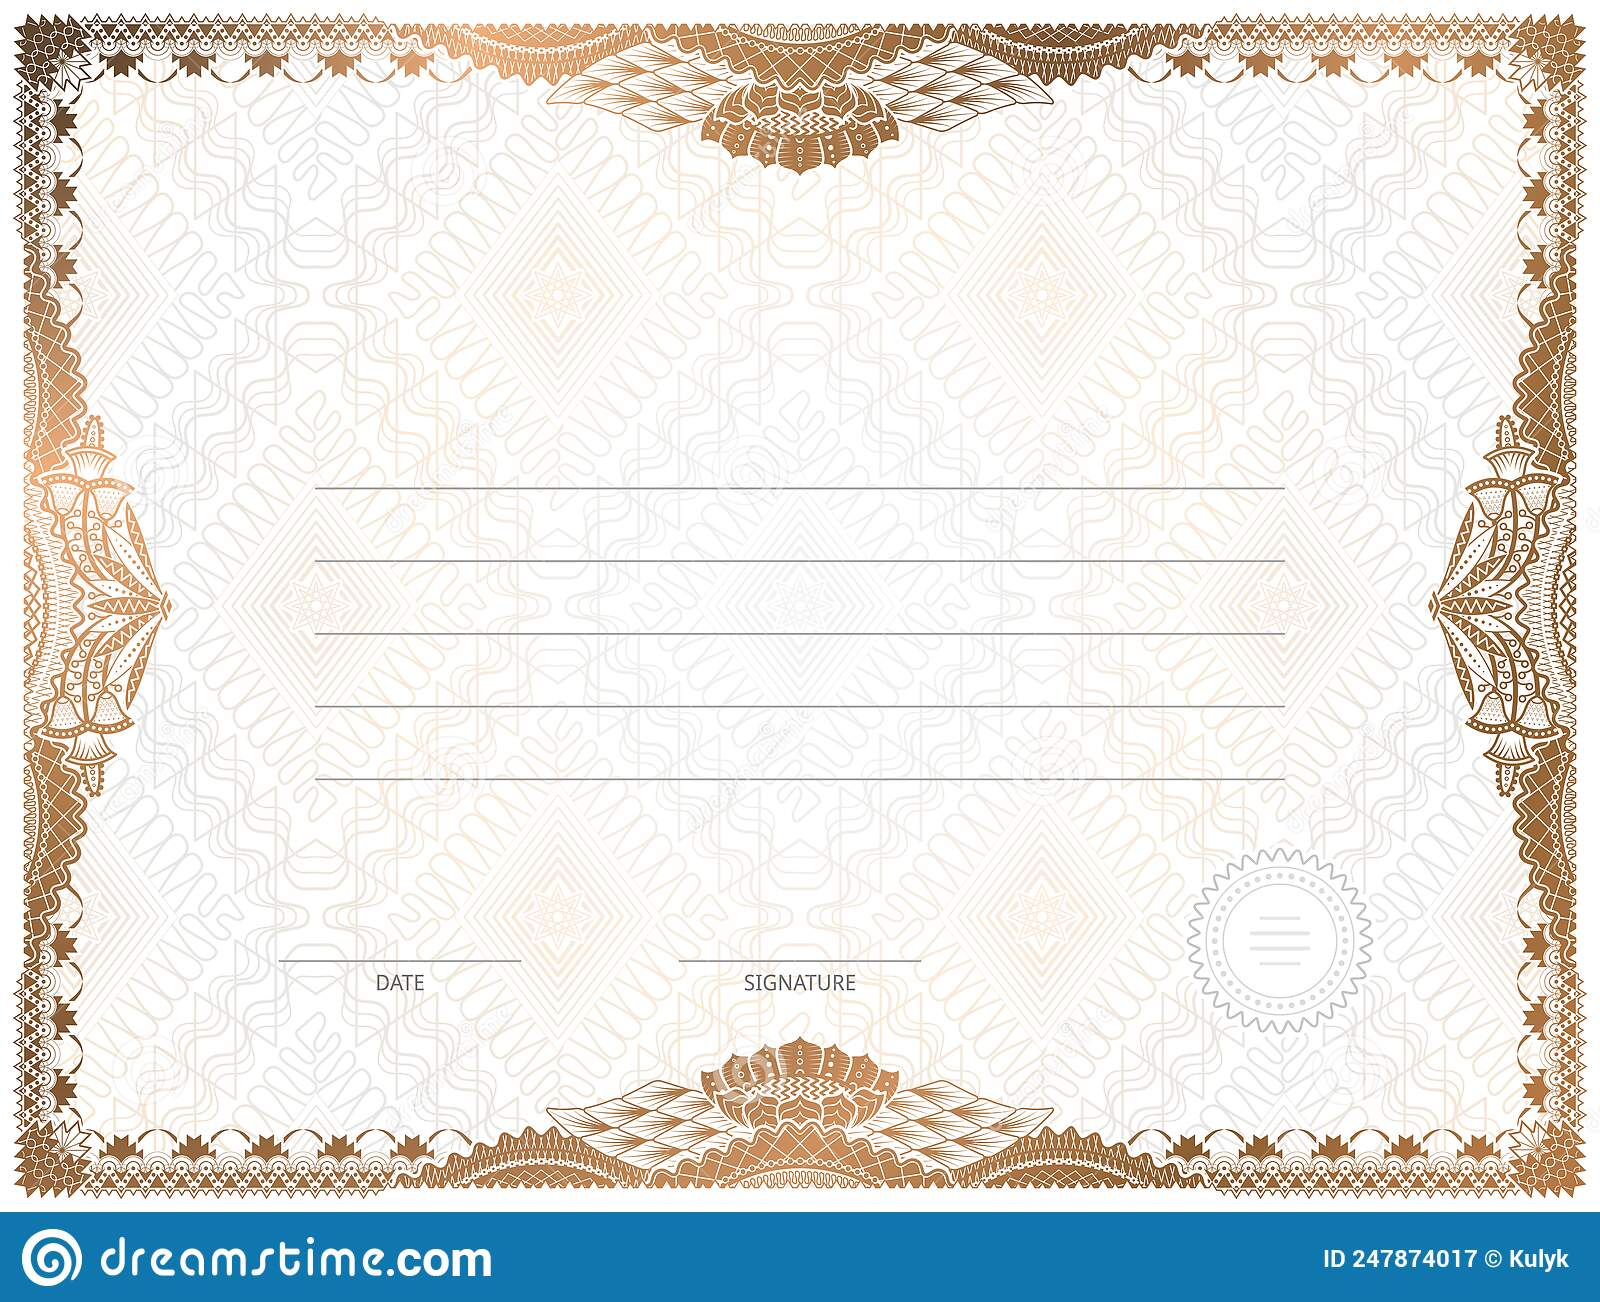 Certificate Template with Guilloche Elements Stock Vector